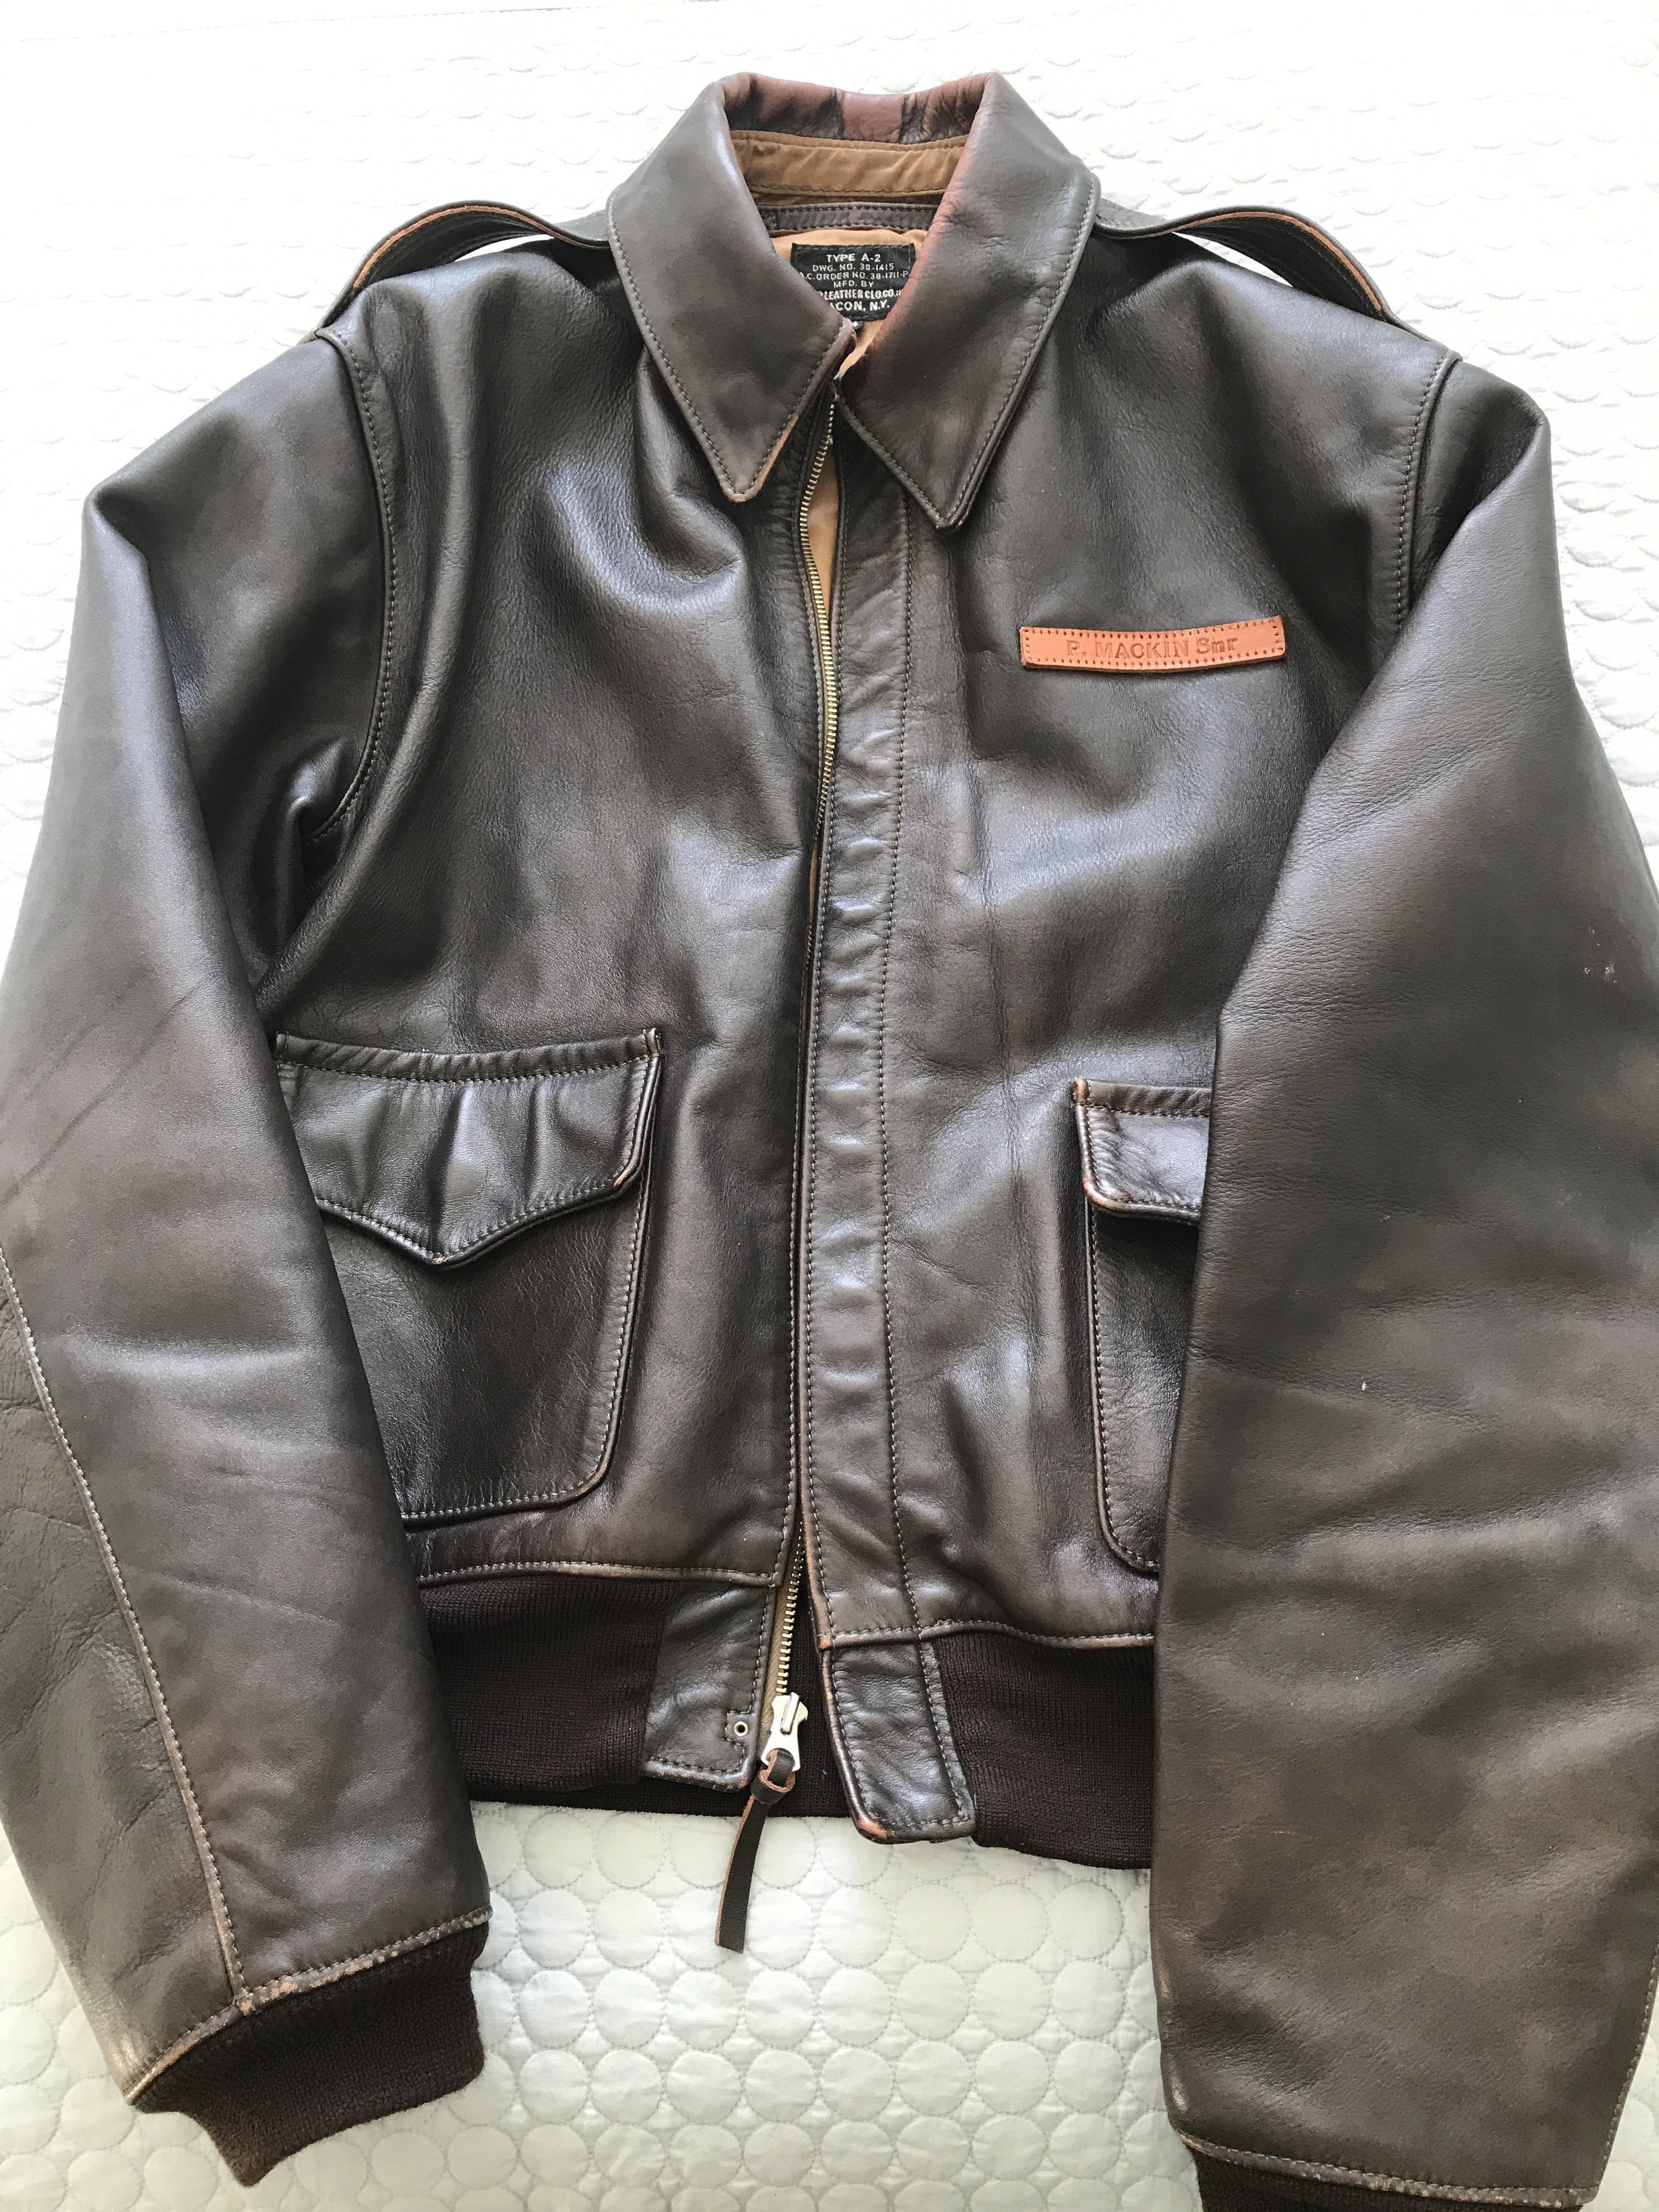 New Real Deal Aero A2 | Vintage Leather Jackets Forum